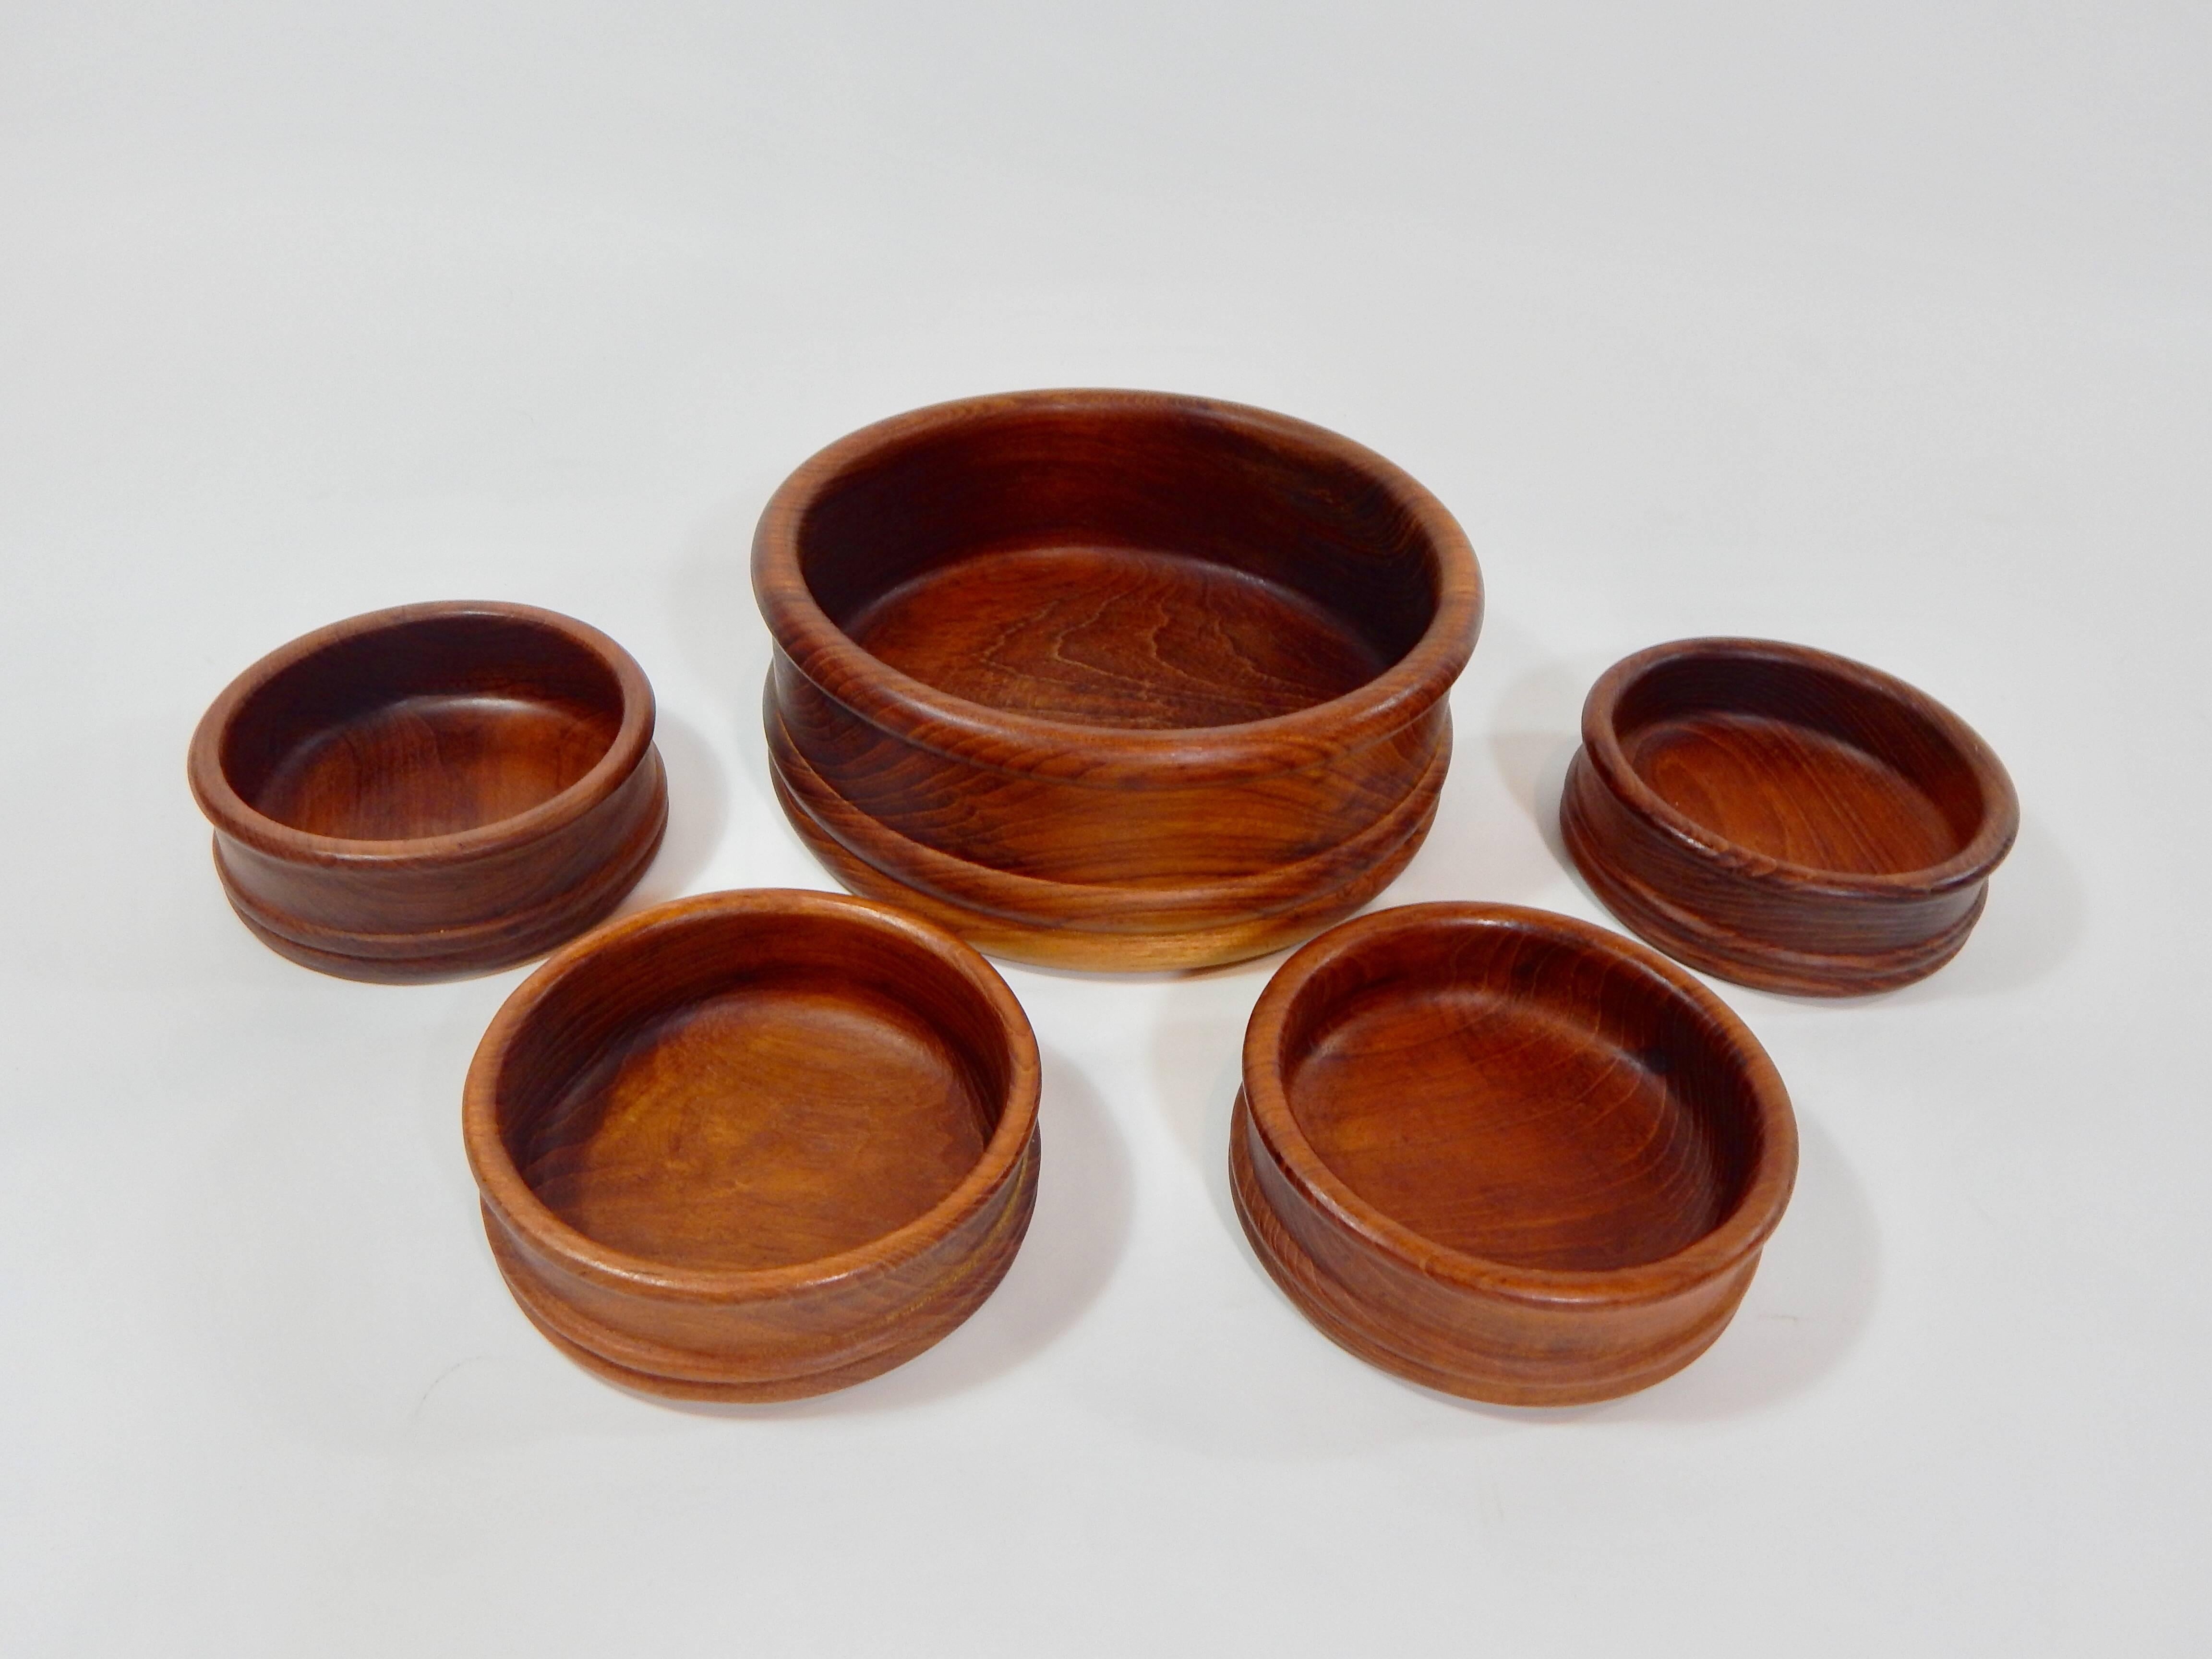 Mid-Century 1960s solid teak salad bowl set. Complete set of five. One large bowl and four small bowls.
Large bowl D10 x H4